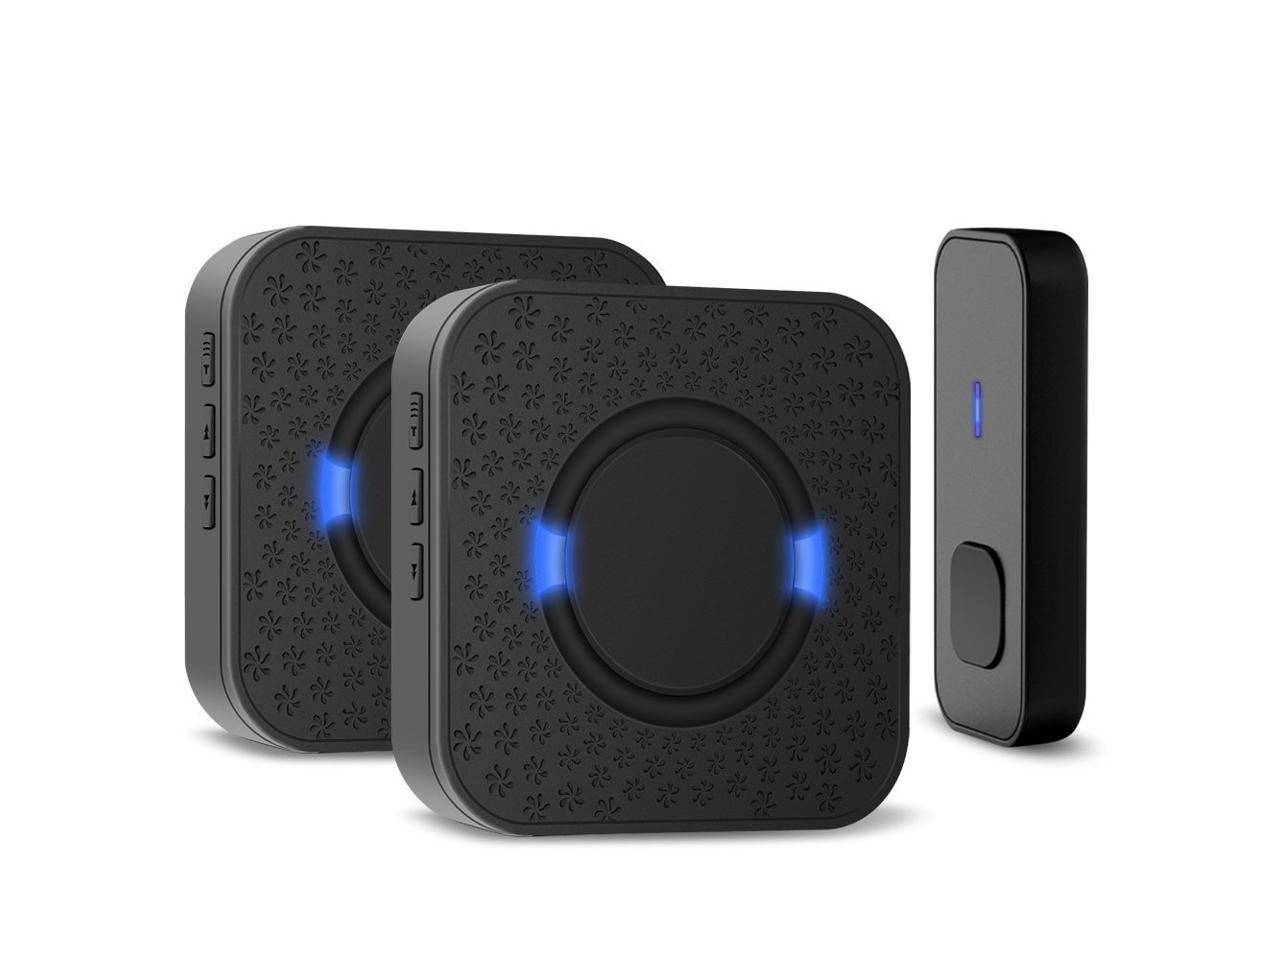 Wireless Doorbell Waterproof Chime Kit up to 900 ft 2 Receivers & all Light up 